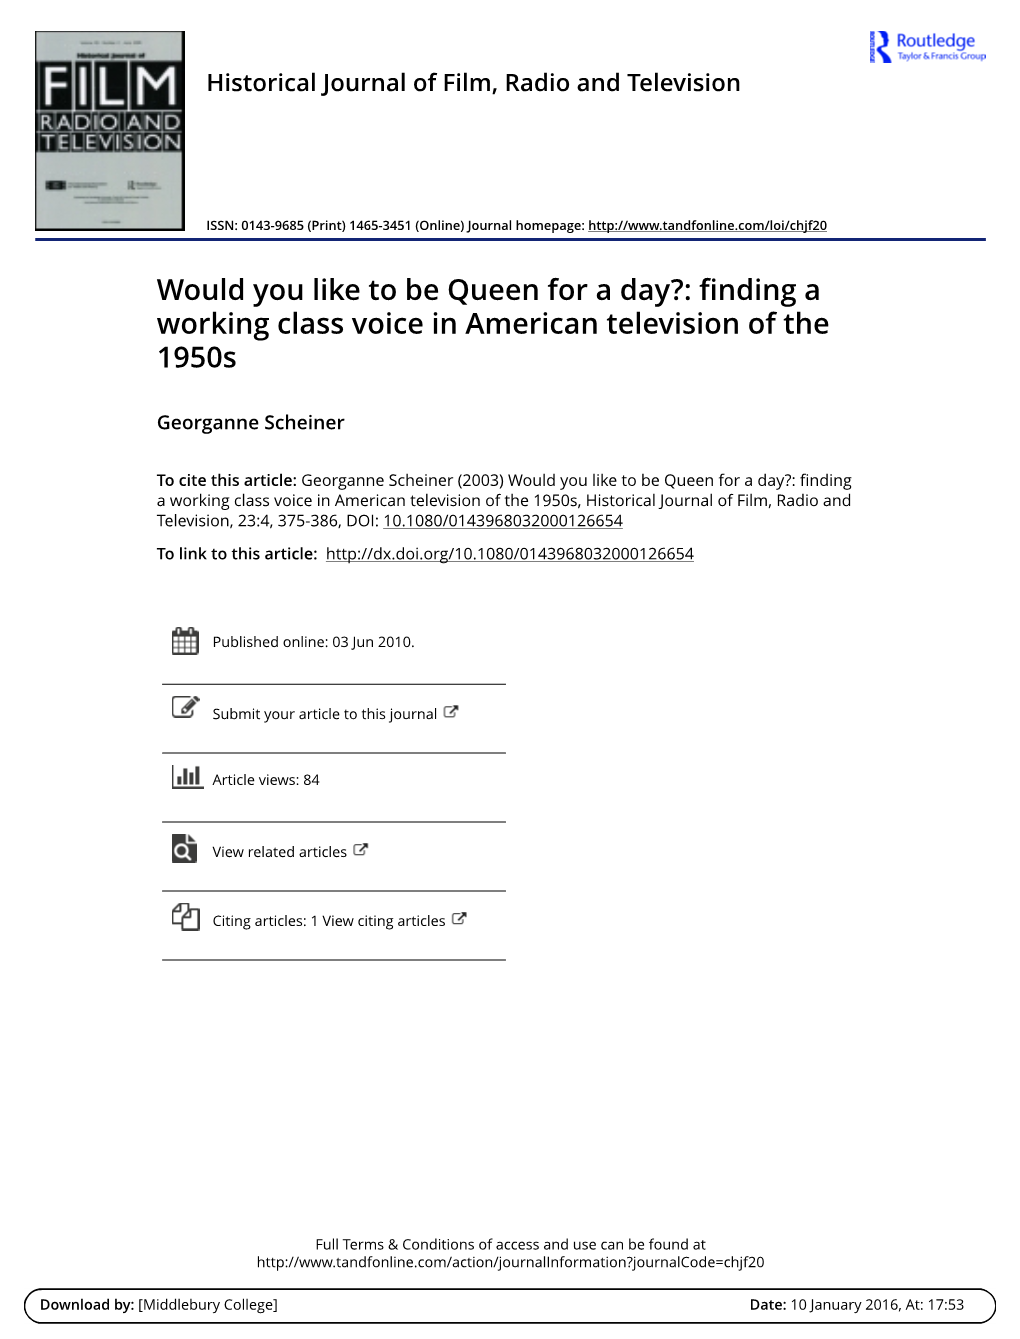 Would You Like to Be Queen for a Day?: Finding a Working